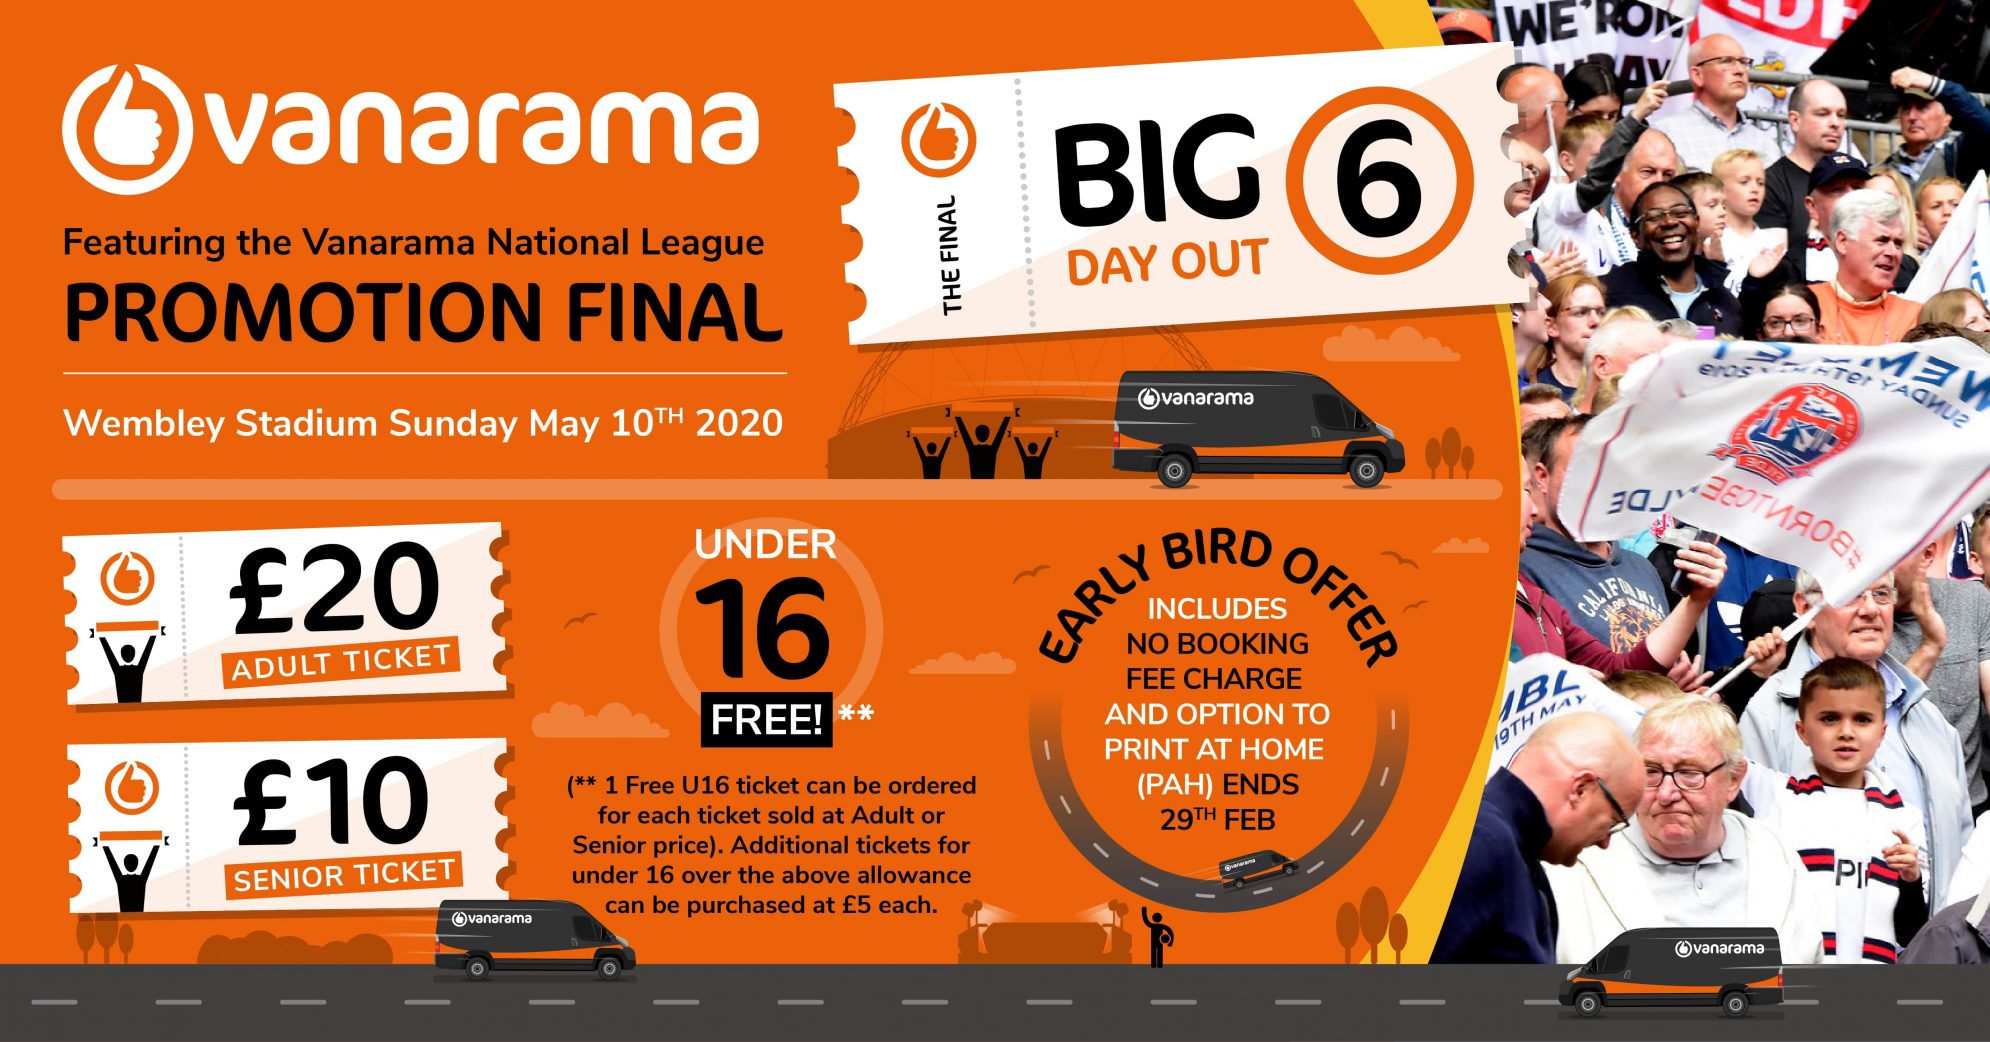 Vanarama Big Day Out 6 - A Special Early Bird Offer!